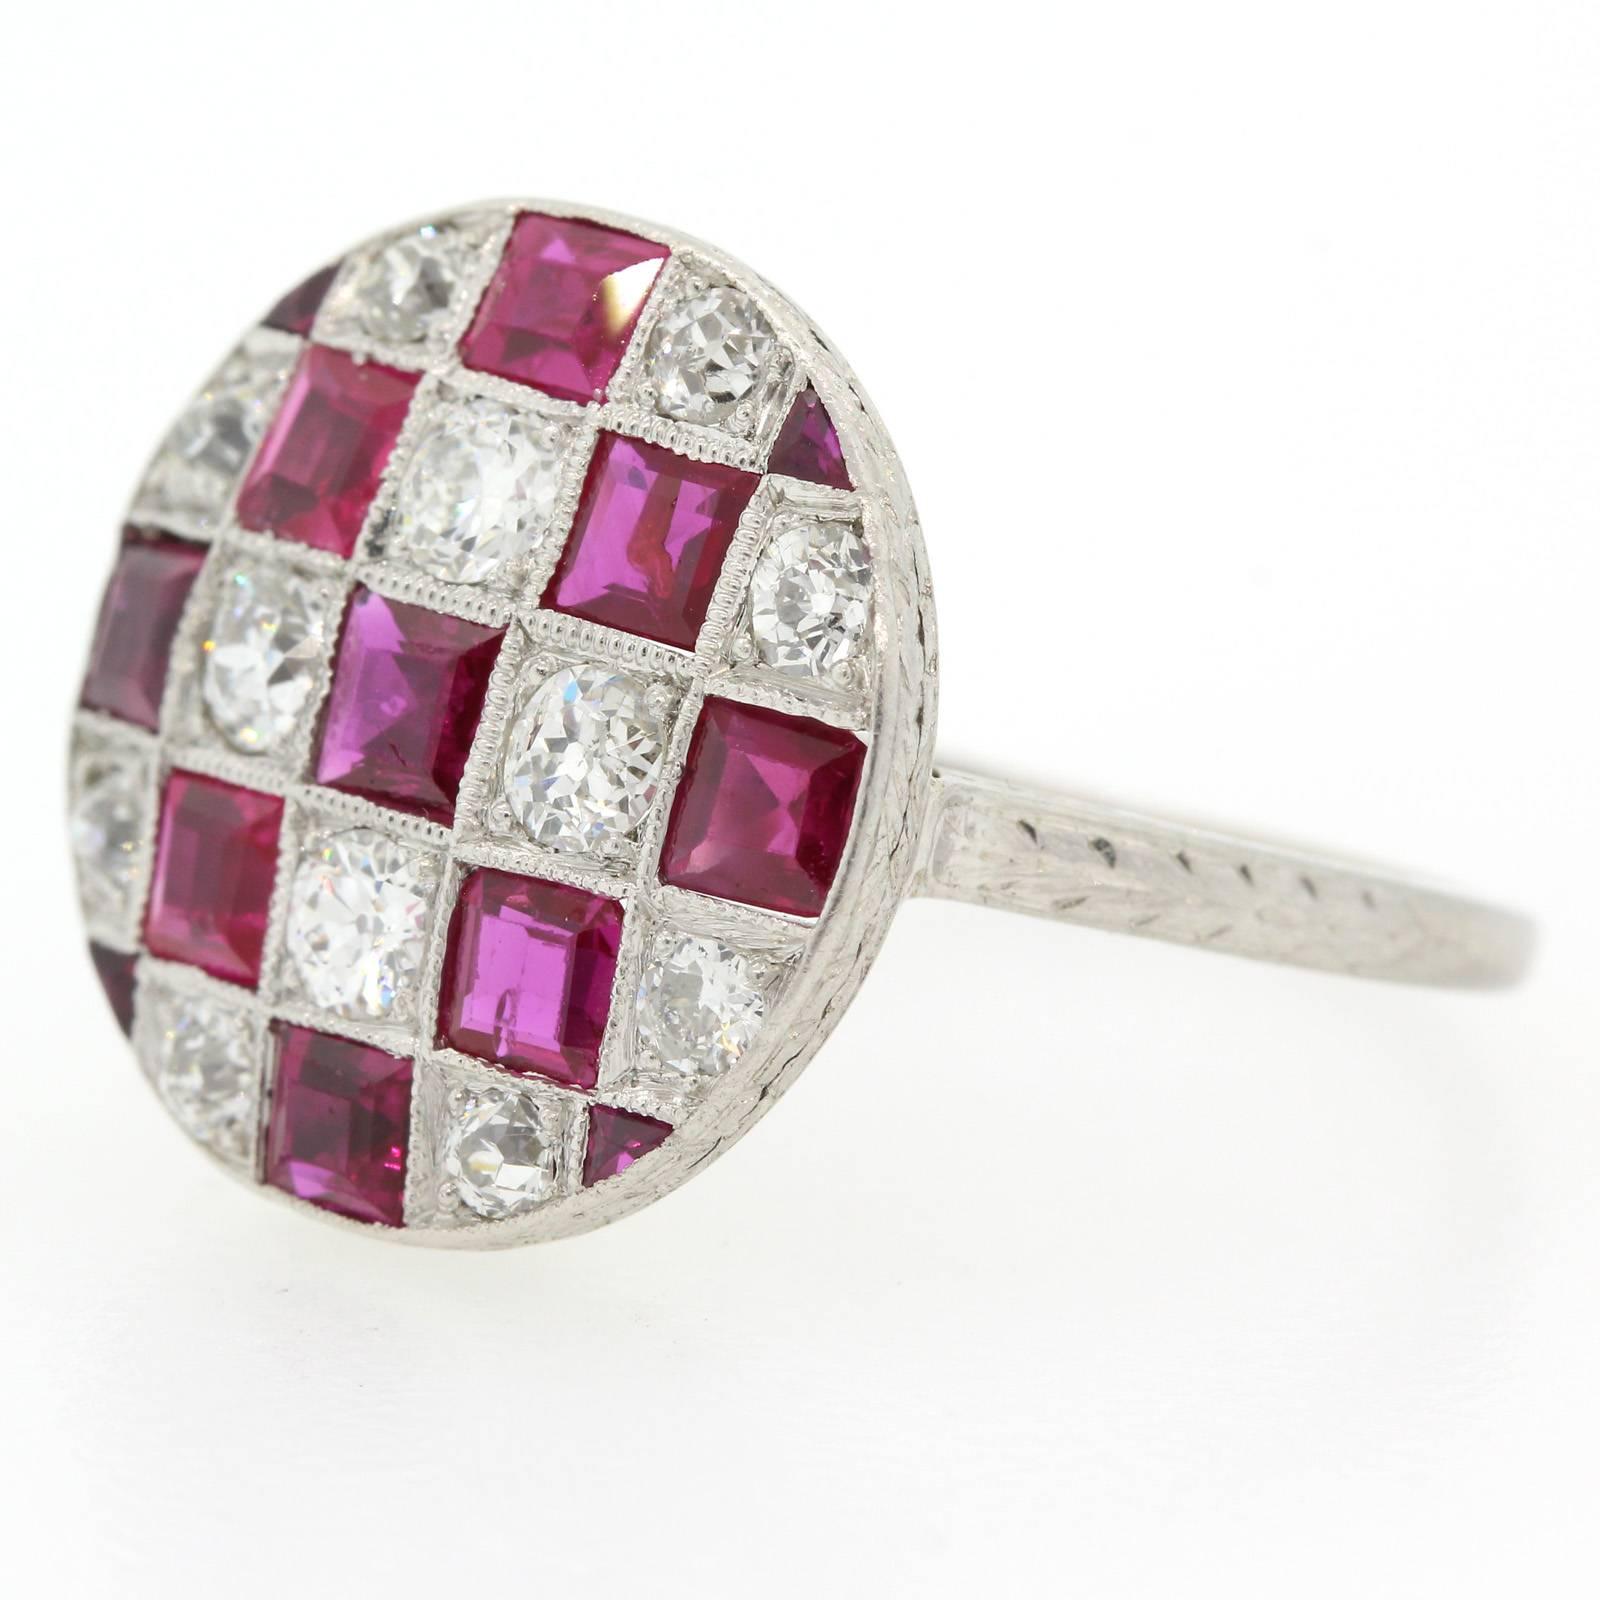 A unique checker design 1920s platinum ring set with nine square cut Burma Rubies and one carat fifteen of Old European Cut Diamonds of H color - VS clarity.  The setting is accented with hand engraving wheat design and enhanced with time worm